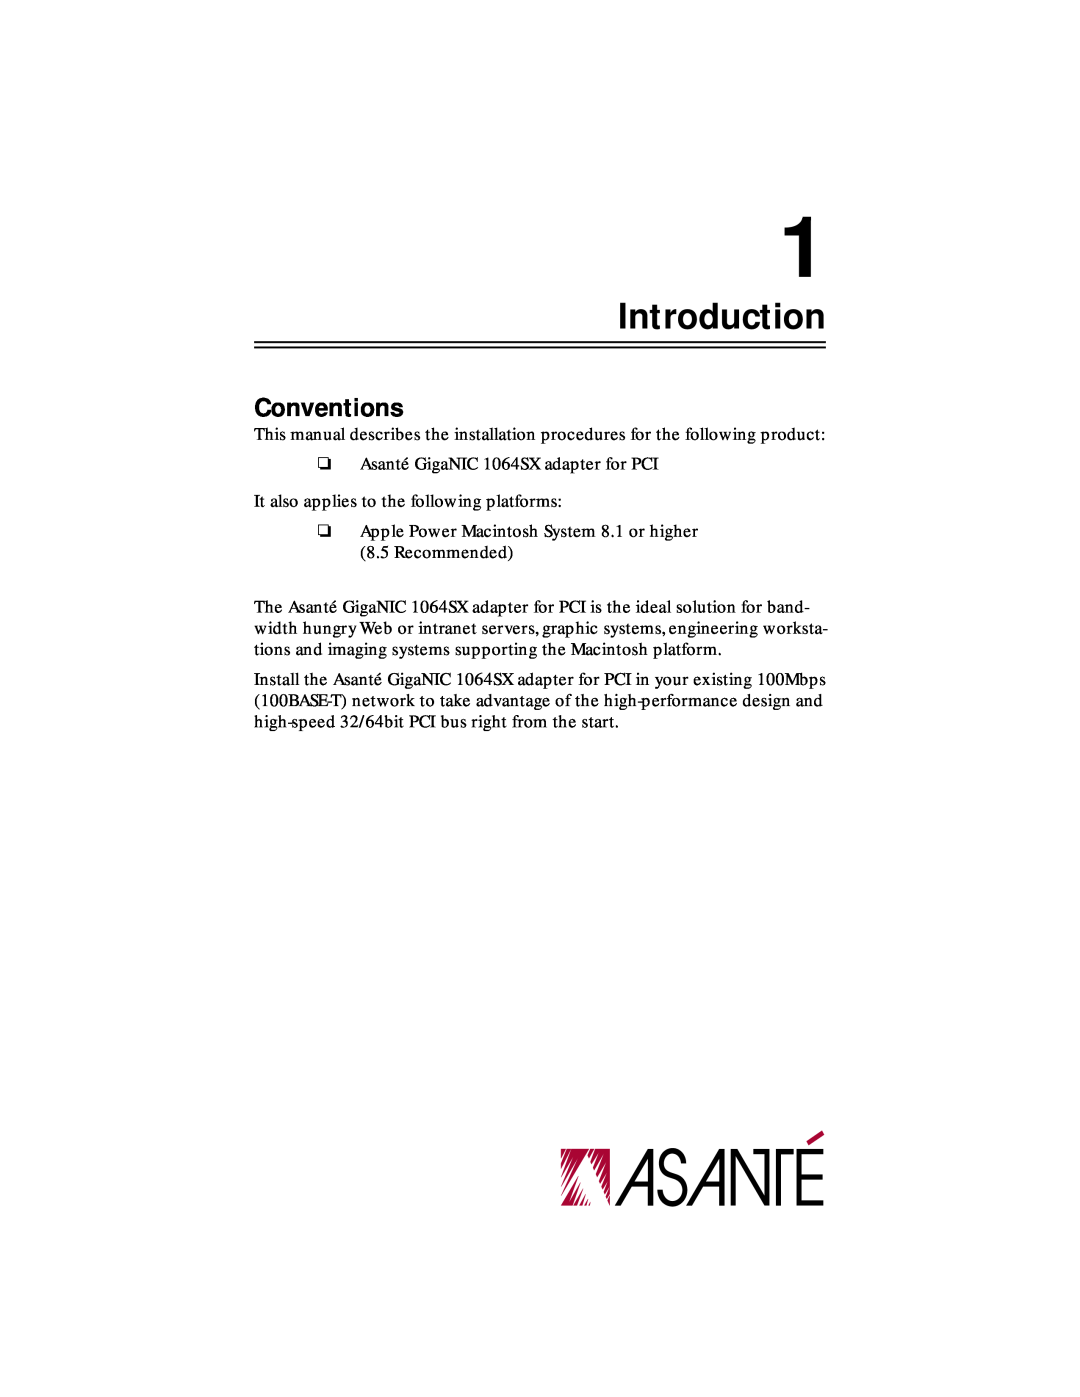 Asante Technologies 1064SX manual Introduction, Conventions 